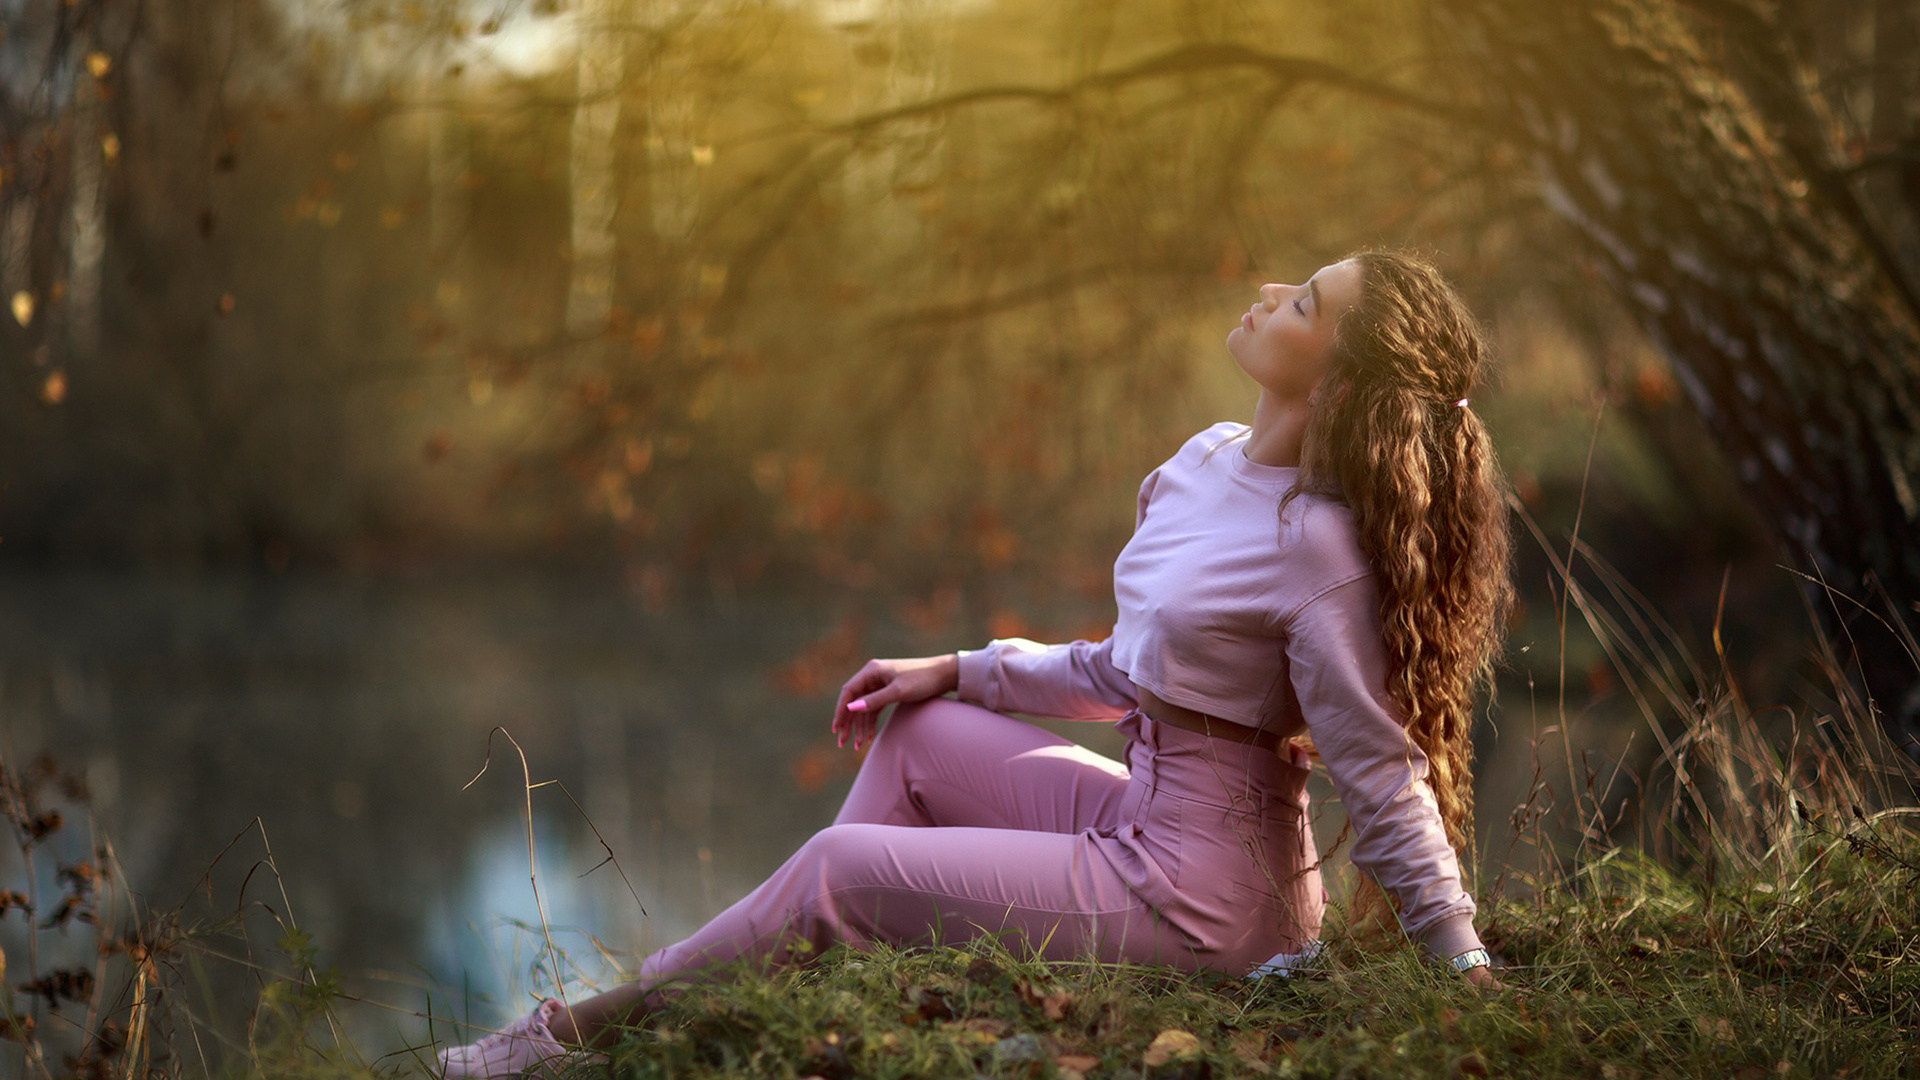 women, model, brunette, women outdoors, lake, nature, curly hair, wavy hair, sitting, sweater, pants, closed eyes, sneakers, trees, grass